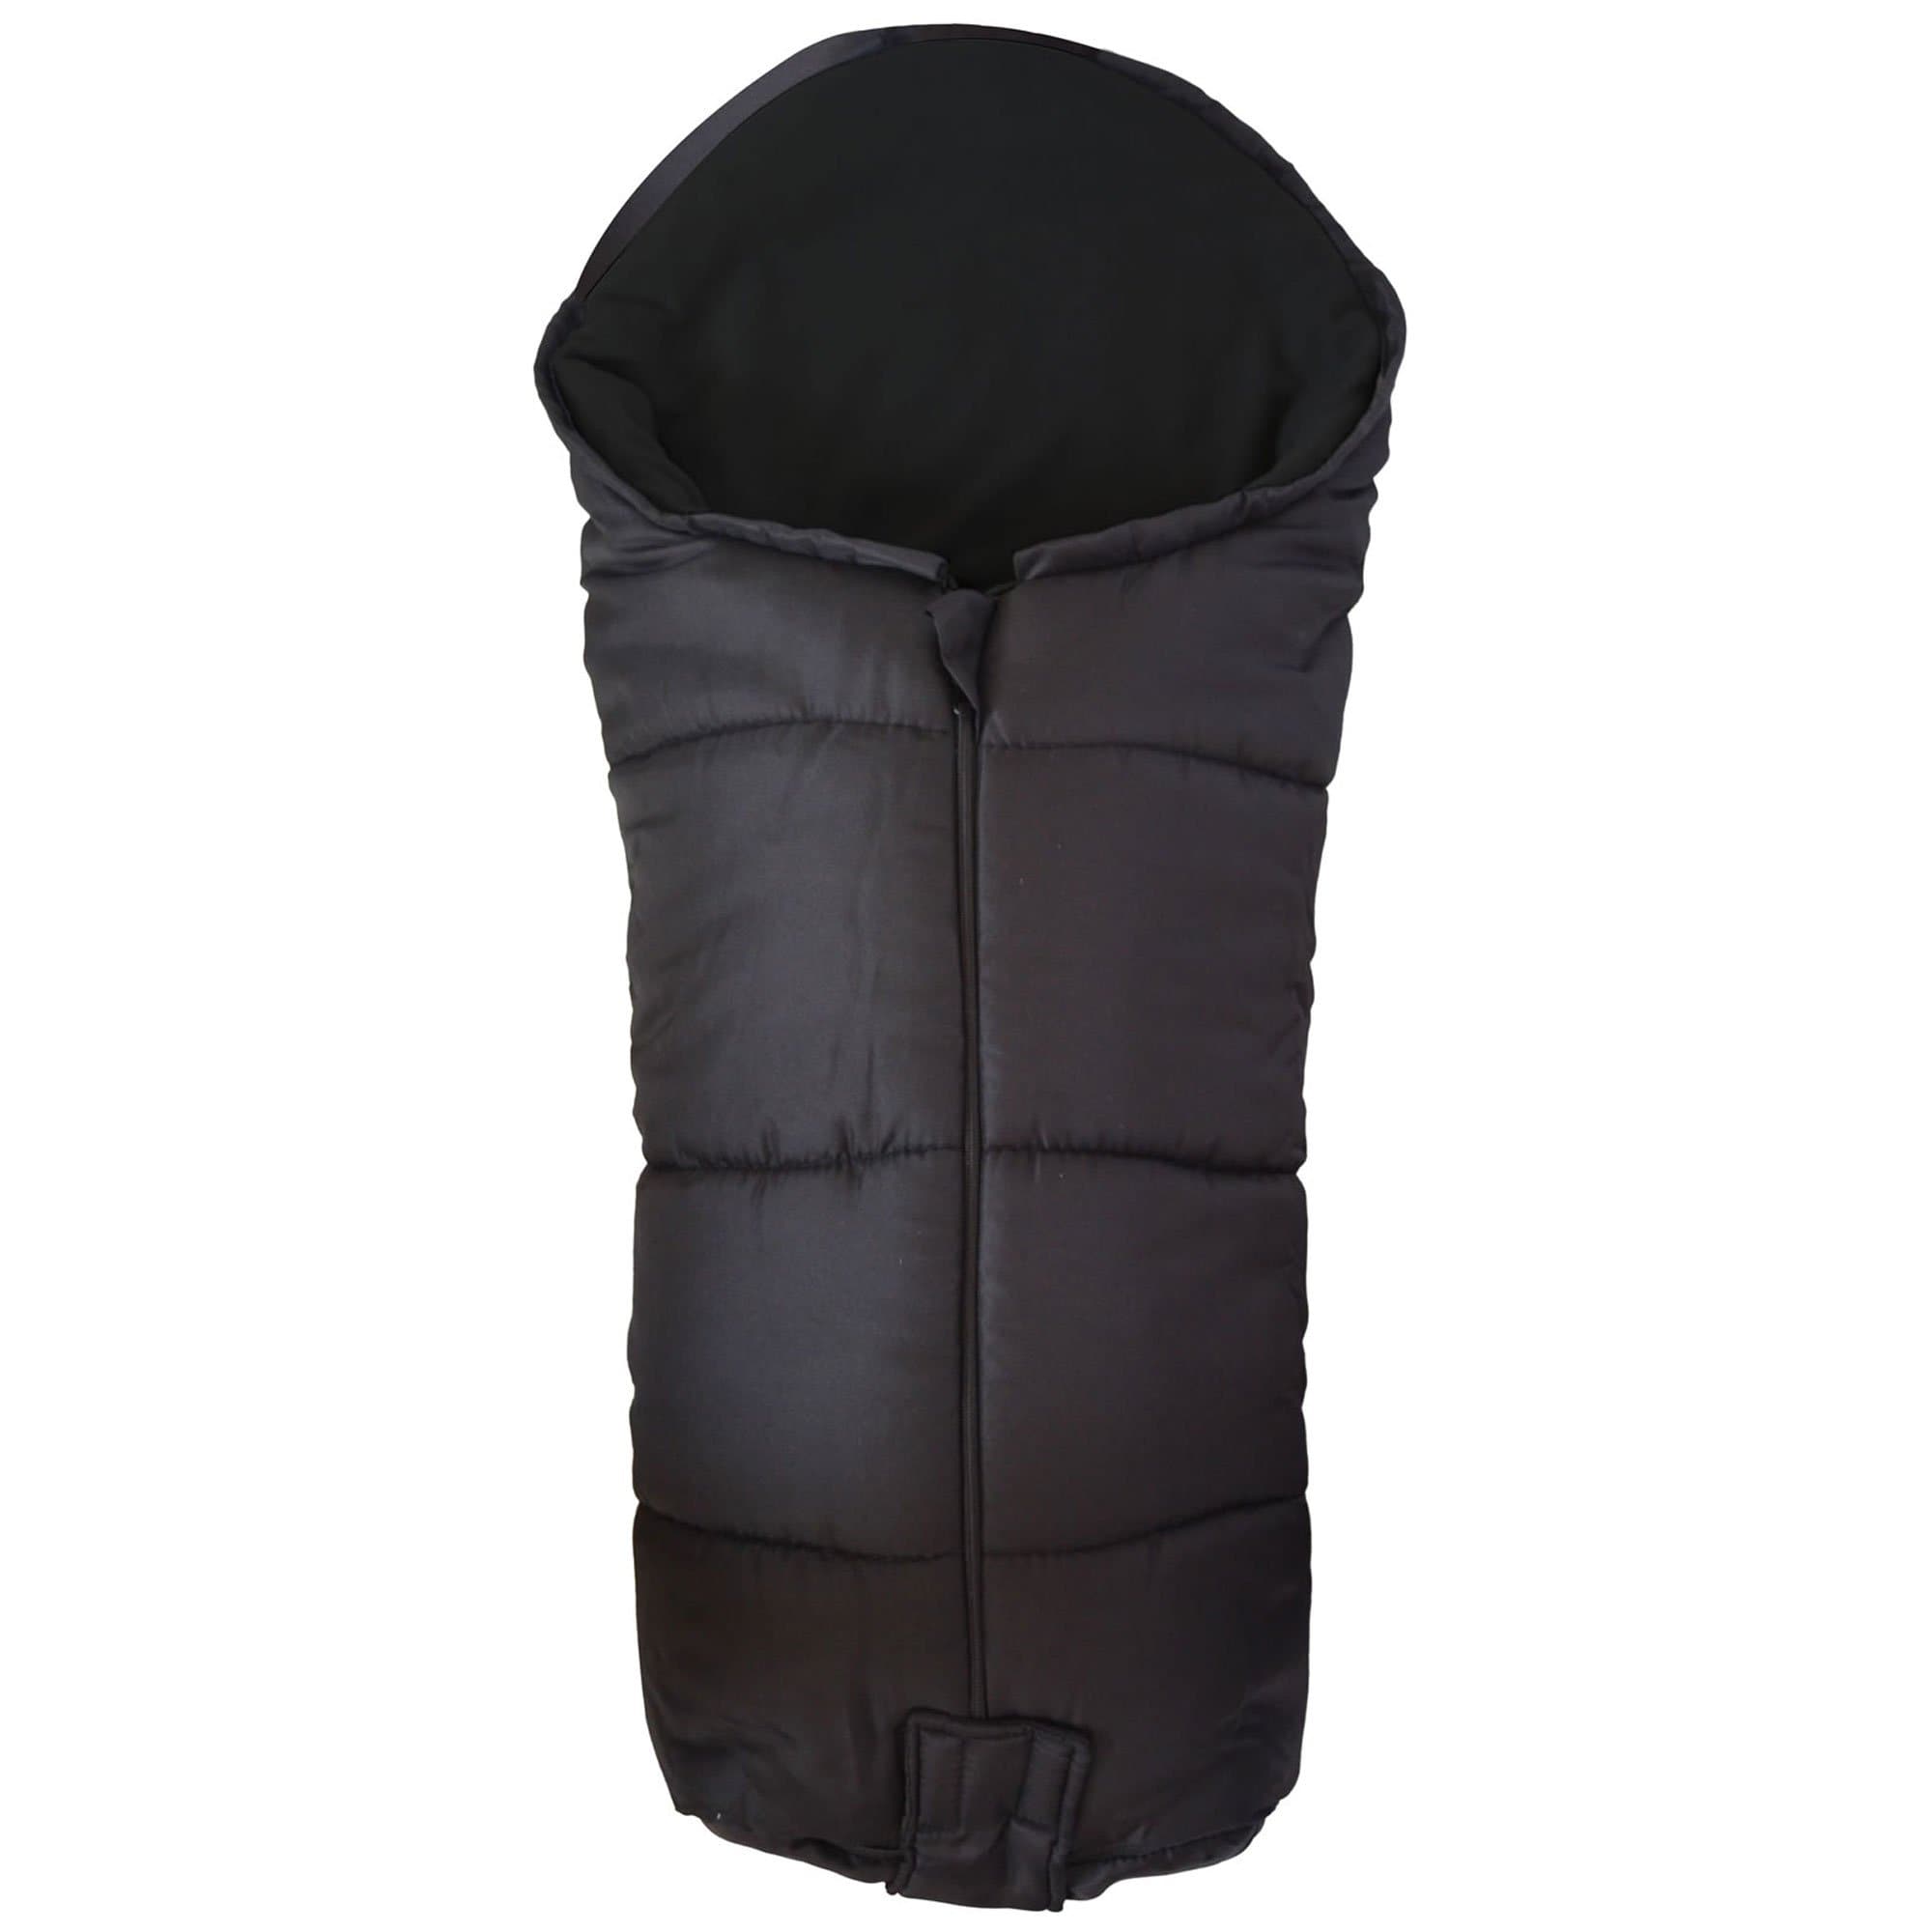 Deluxe Footmuff / Cosy Toes Compatible with Casual - Black / Fits All Models | For Your Little One